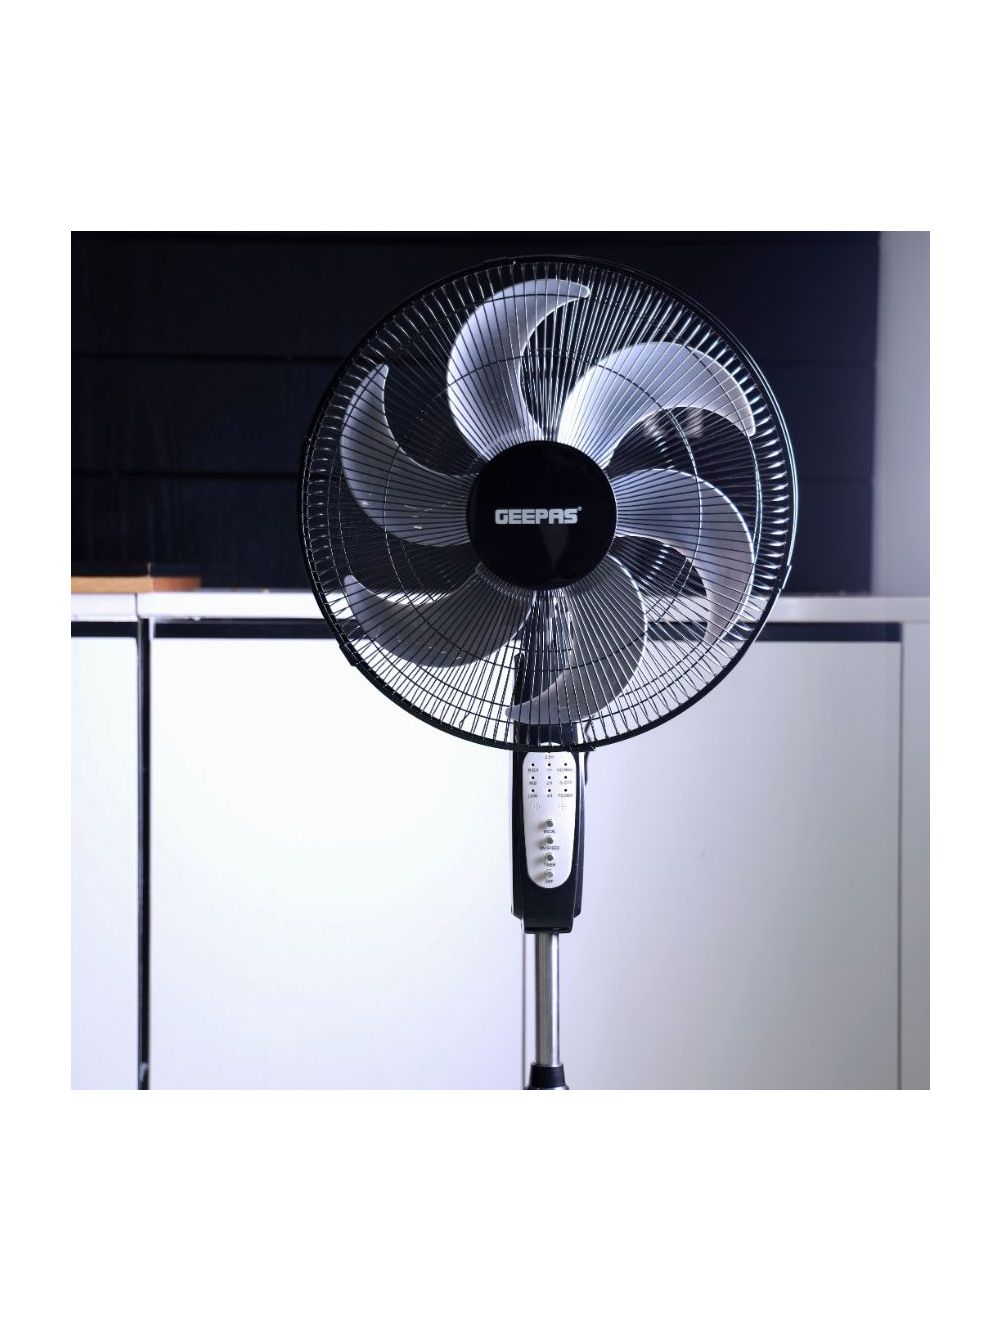 Geepas 16 Inch Stand Fan With Remote Control | in Bahrain | Halabh.com